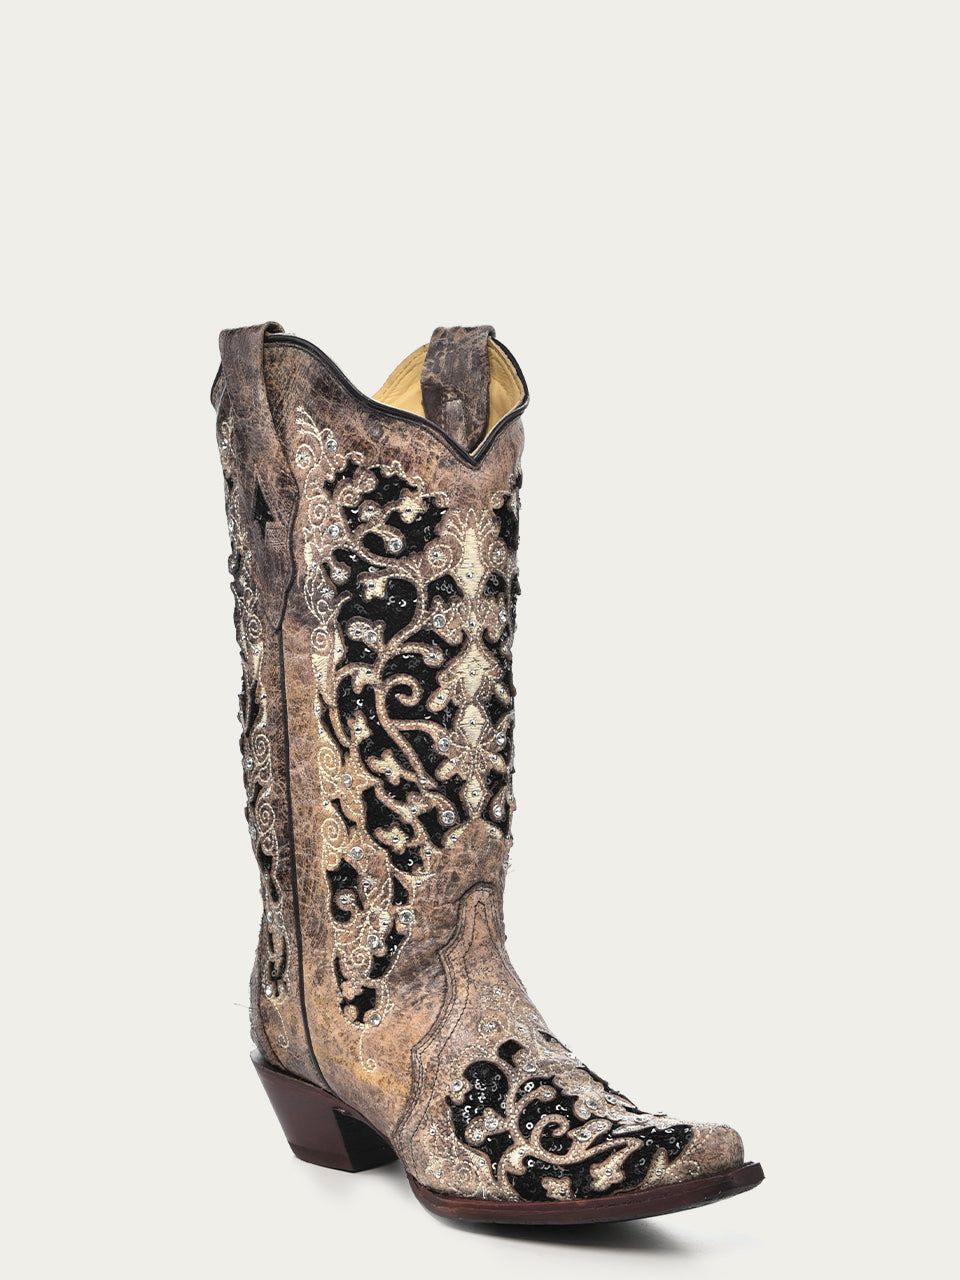 Corral Leopard Print Embroidery Ankle Boot E1650